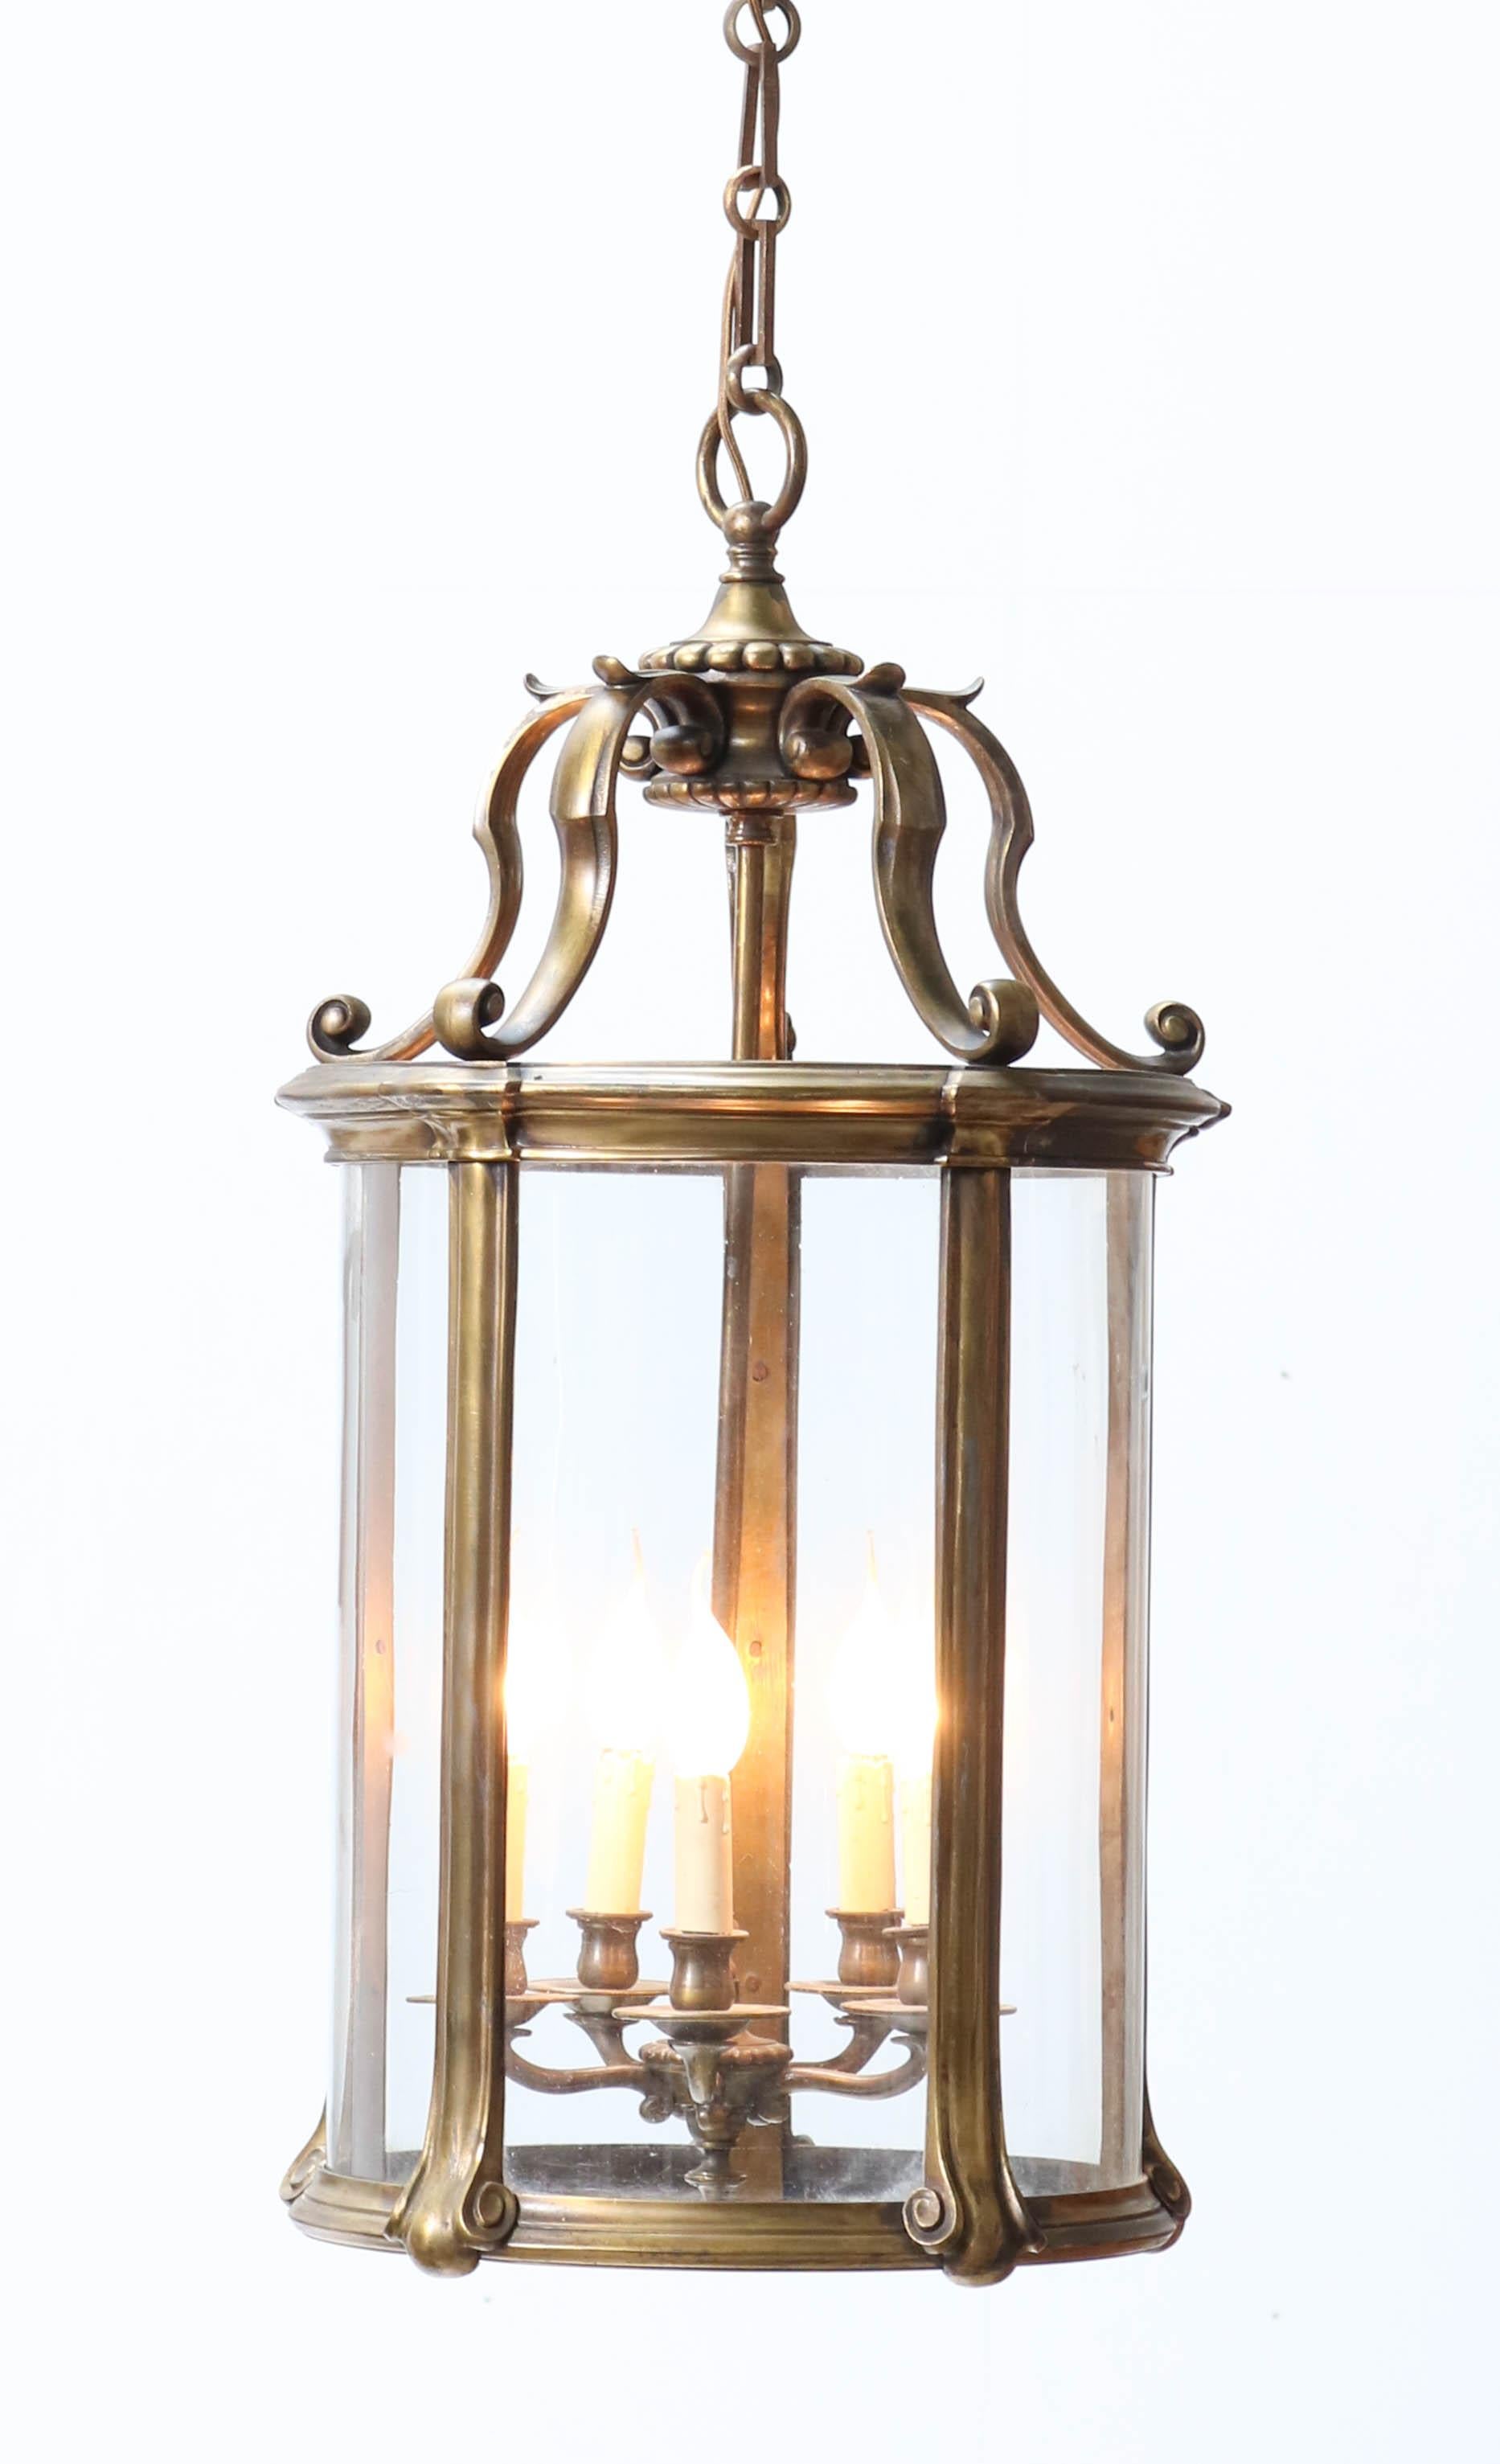 Magnificent and large Louis XV style lantern.
Striking French design from the 1900s.
Solid bronze six sided cage with six original glass shades.
Extra large chain which can be shortened.
Rewired with six sockets for E-27 light bulbs.
In very